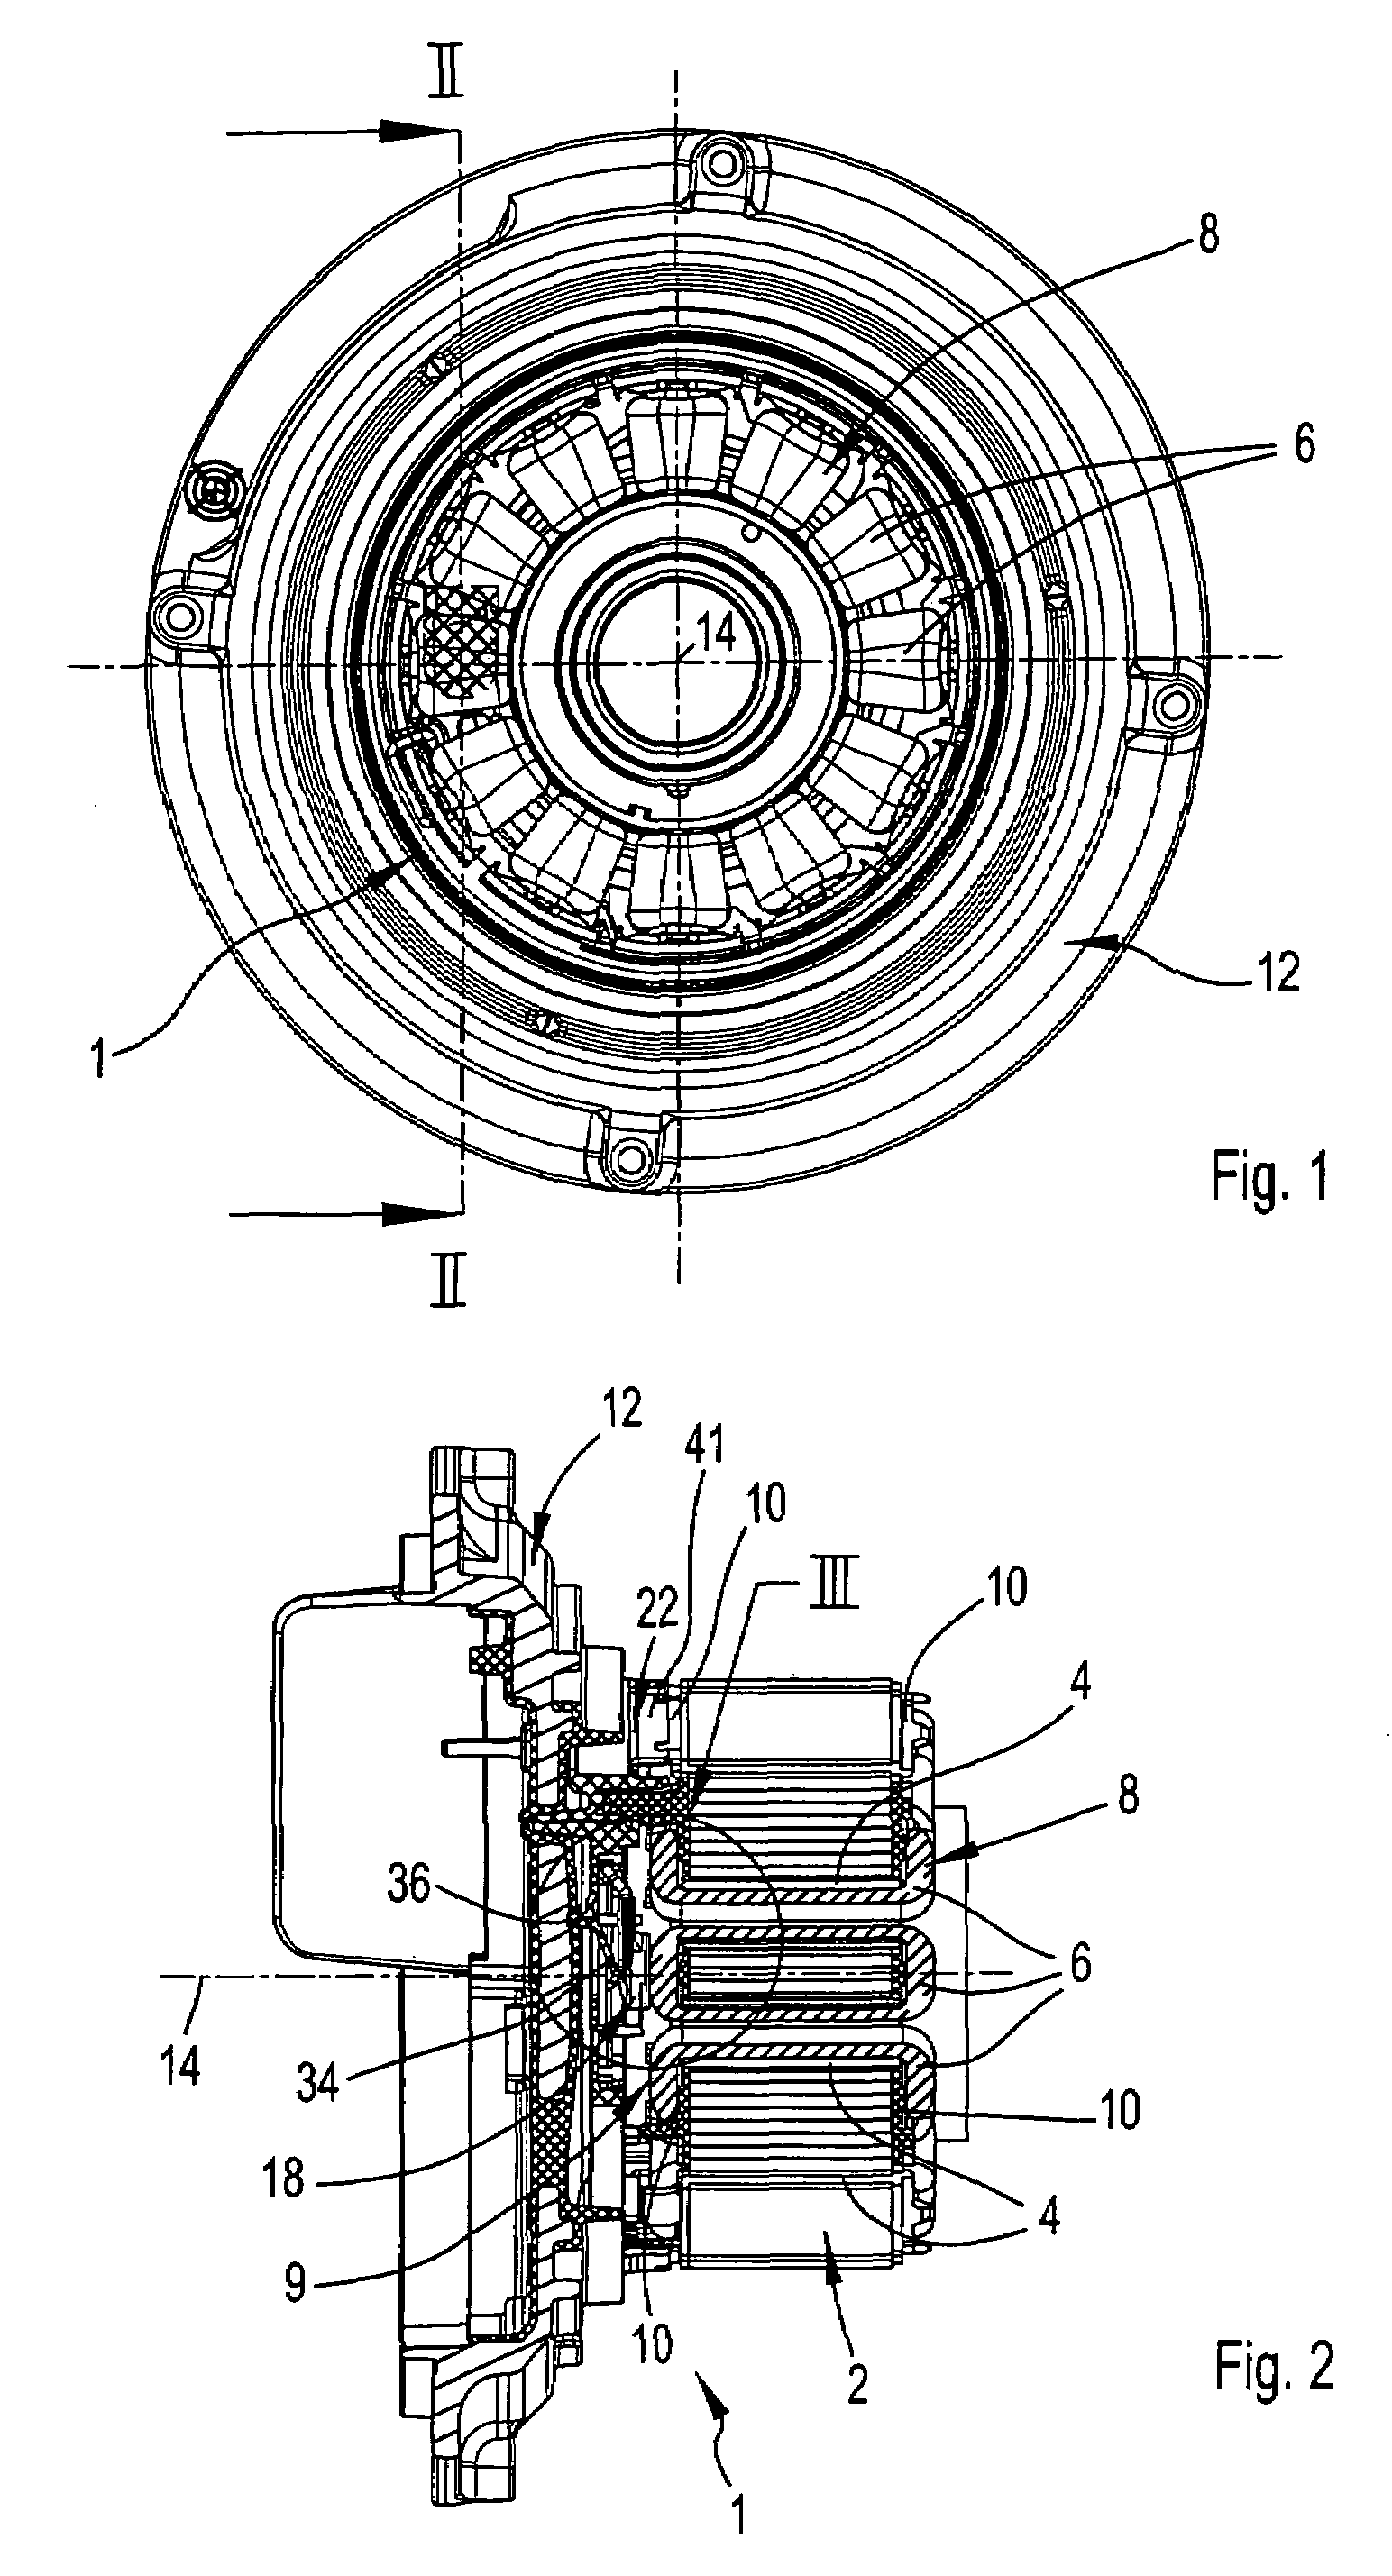 Stator for an electric motor having a temperature monitor